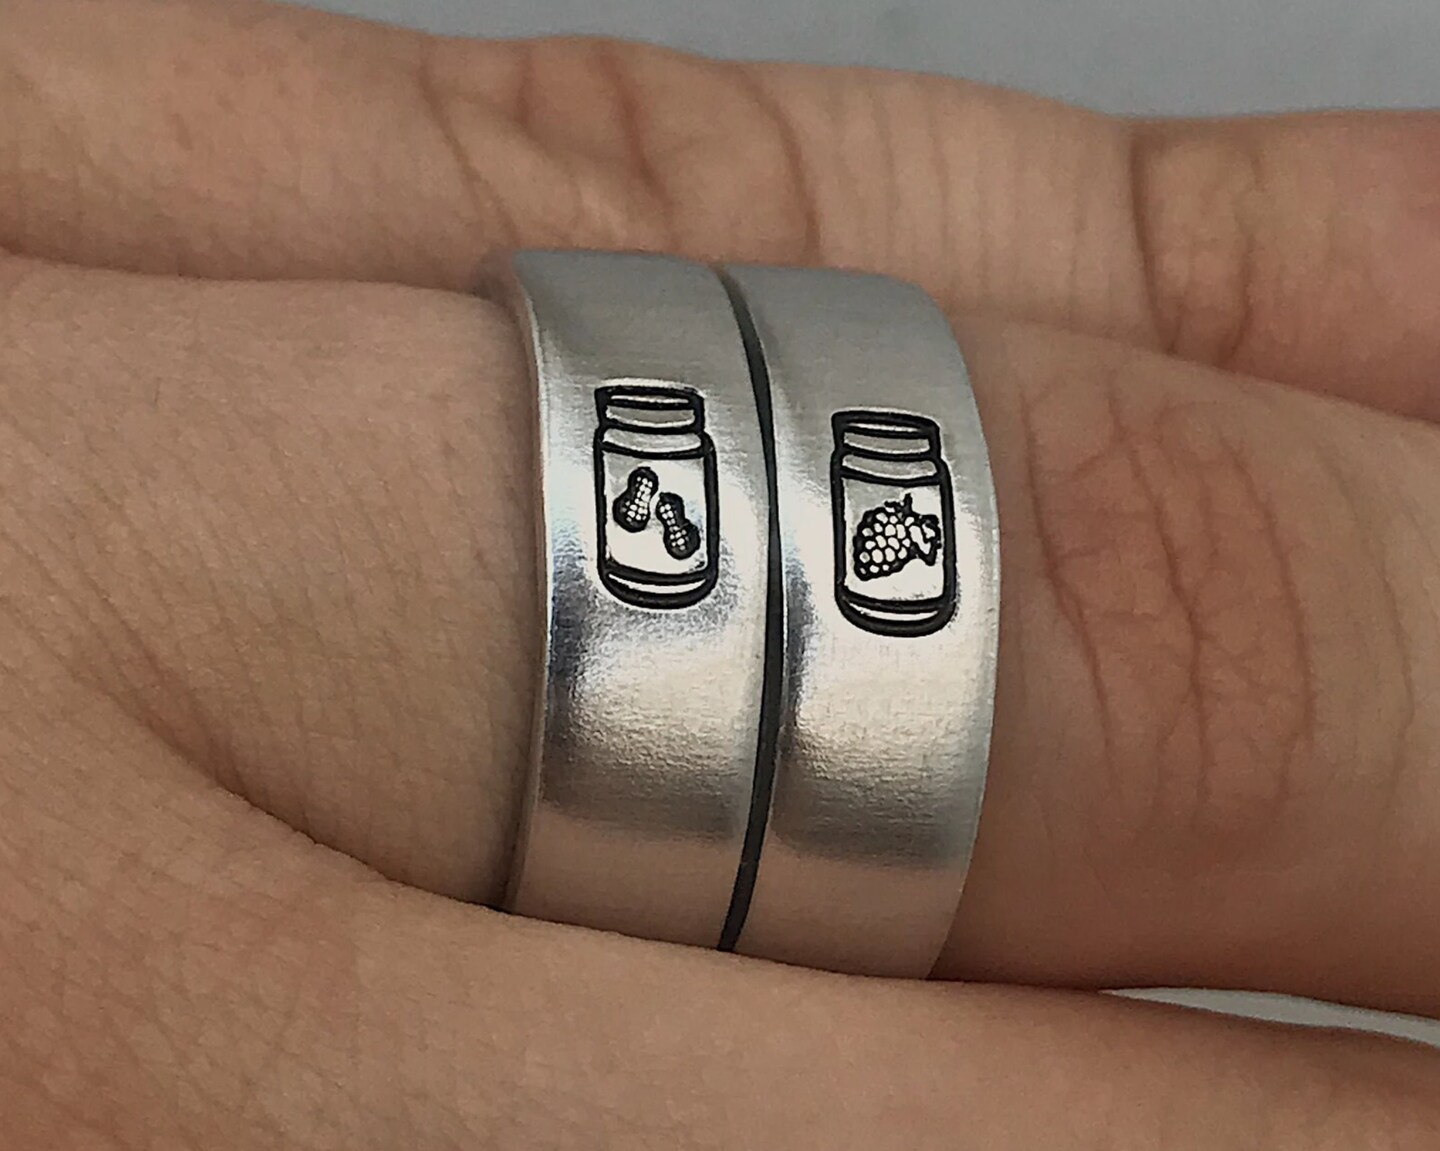 Amazon.com: Friendship Ring Best Friend Rings for 2 Women Infinity Matching Friends  Bff Bestfriend Sister Promise Couples Mens Women's Men Her Couple Set His  and Personalized Engraved Custom Name Sterling Silver :